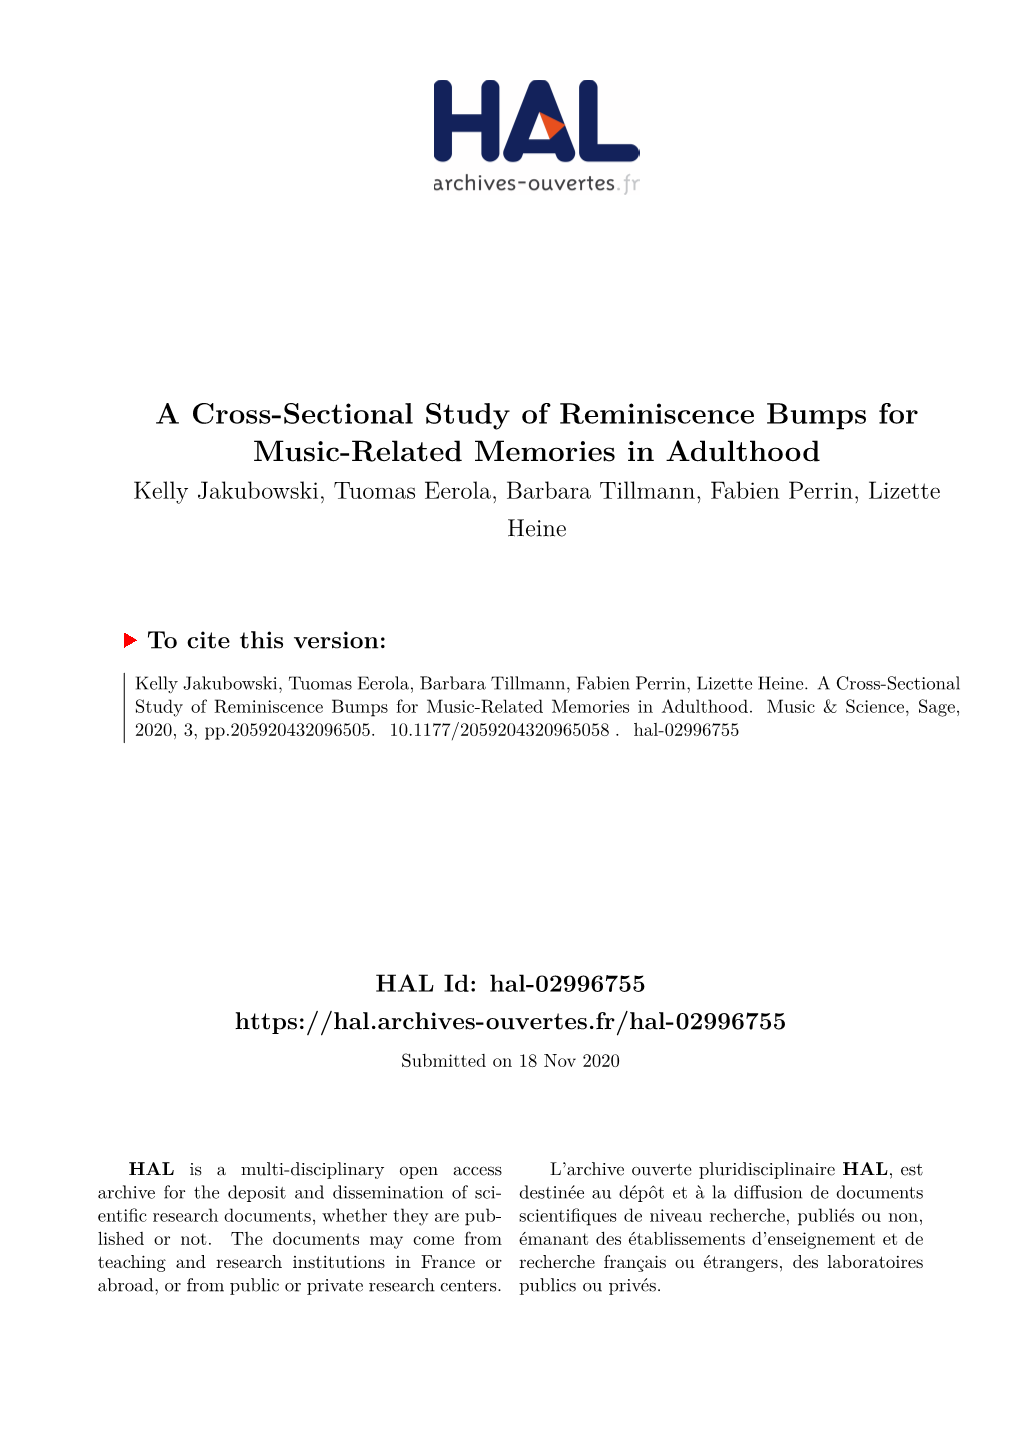 A Cross-Sectional Study of Reminiscence Bumps for Music-Related Memories in Adulthood Kelly Jakubowski, Tuomas Eerola, Barbara Tillmann, Fabien Perrin, Lizette Heine